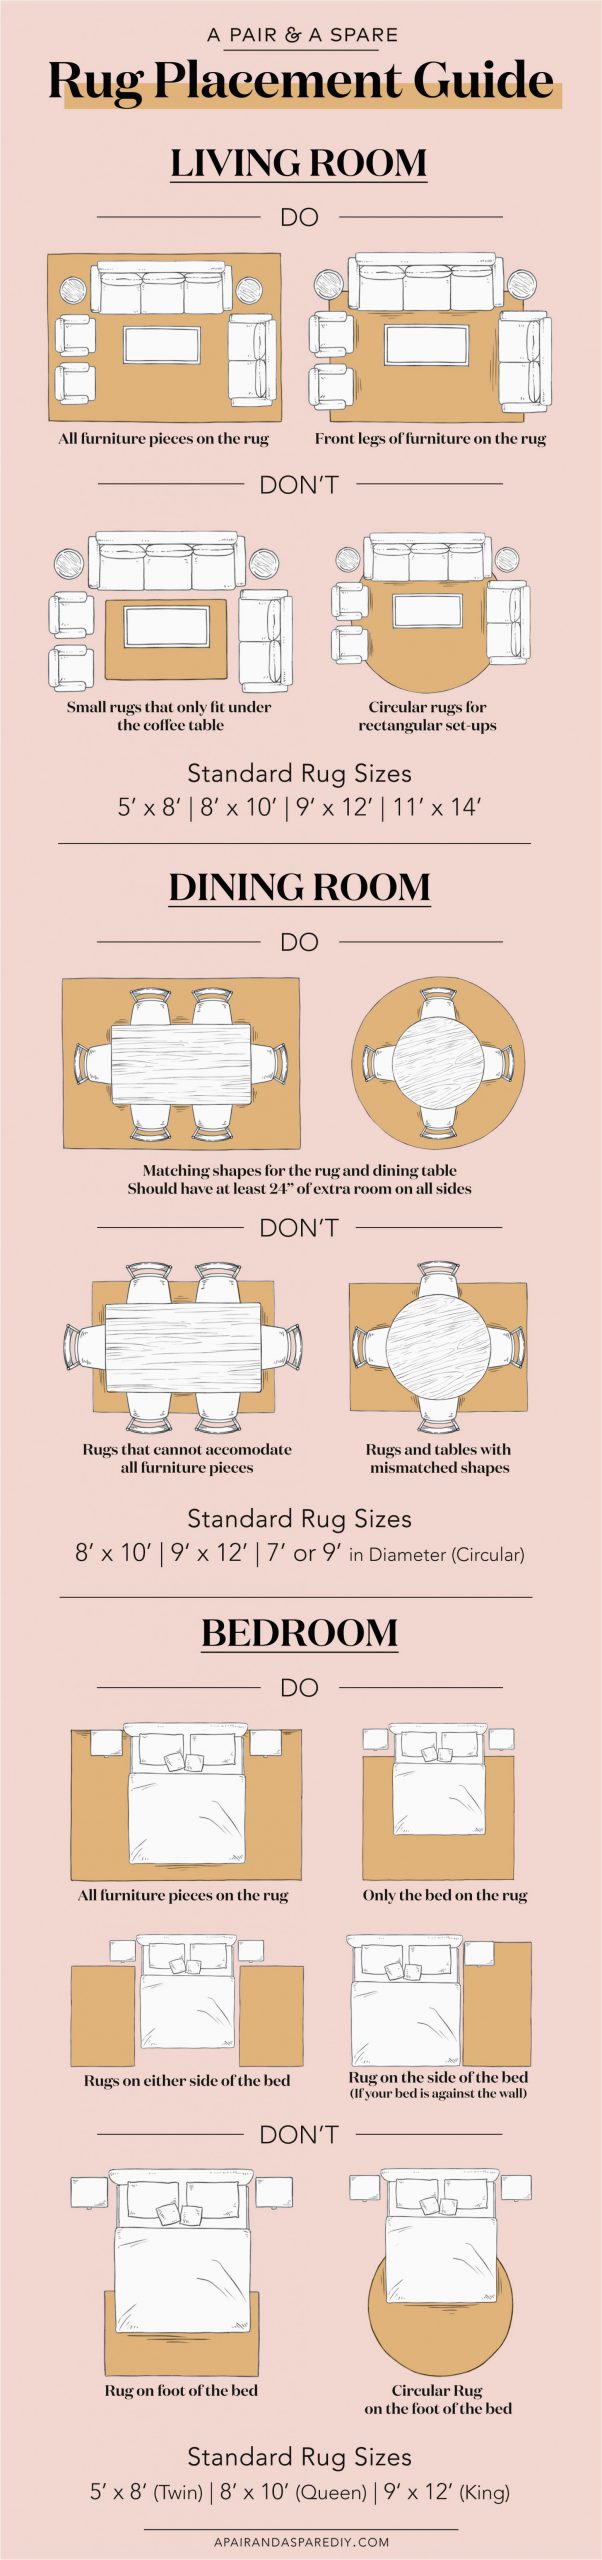 Rug Placement Guide 778x3307 2x